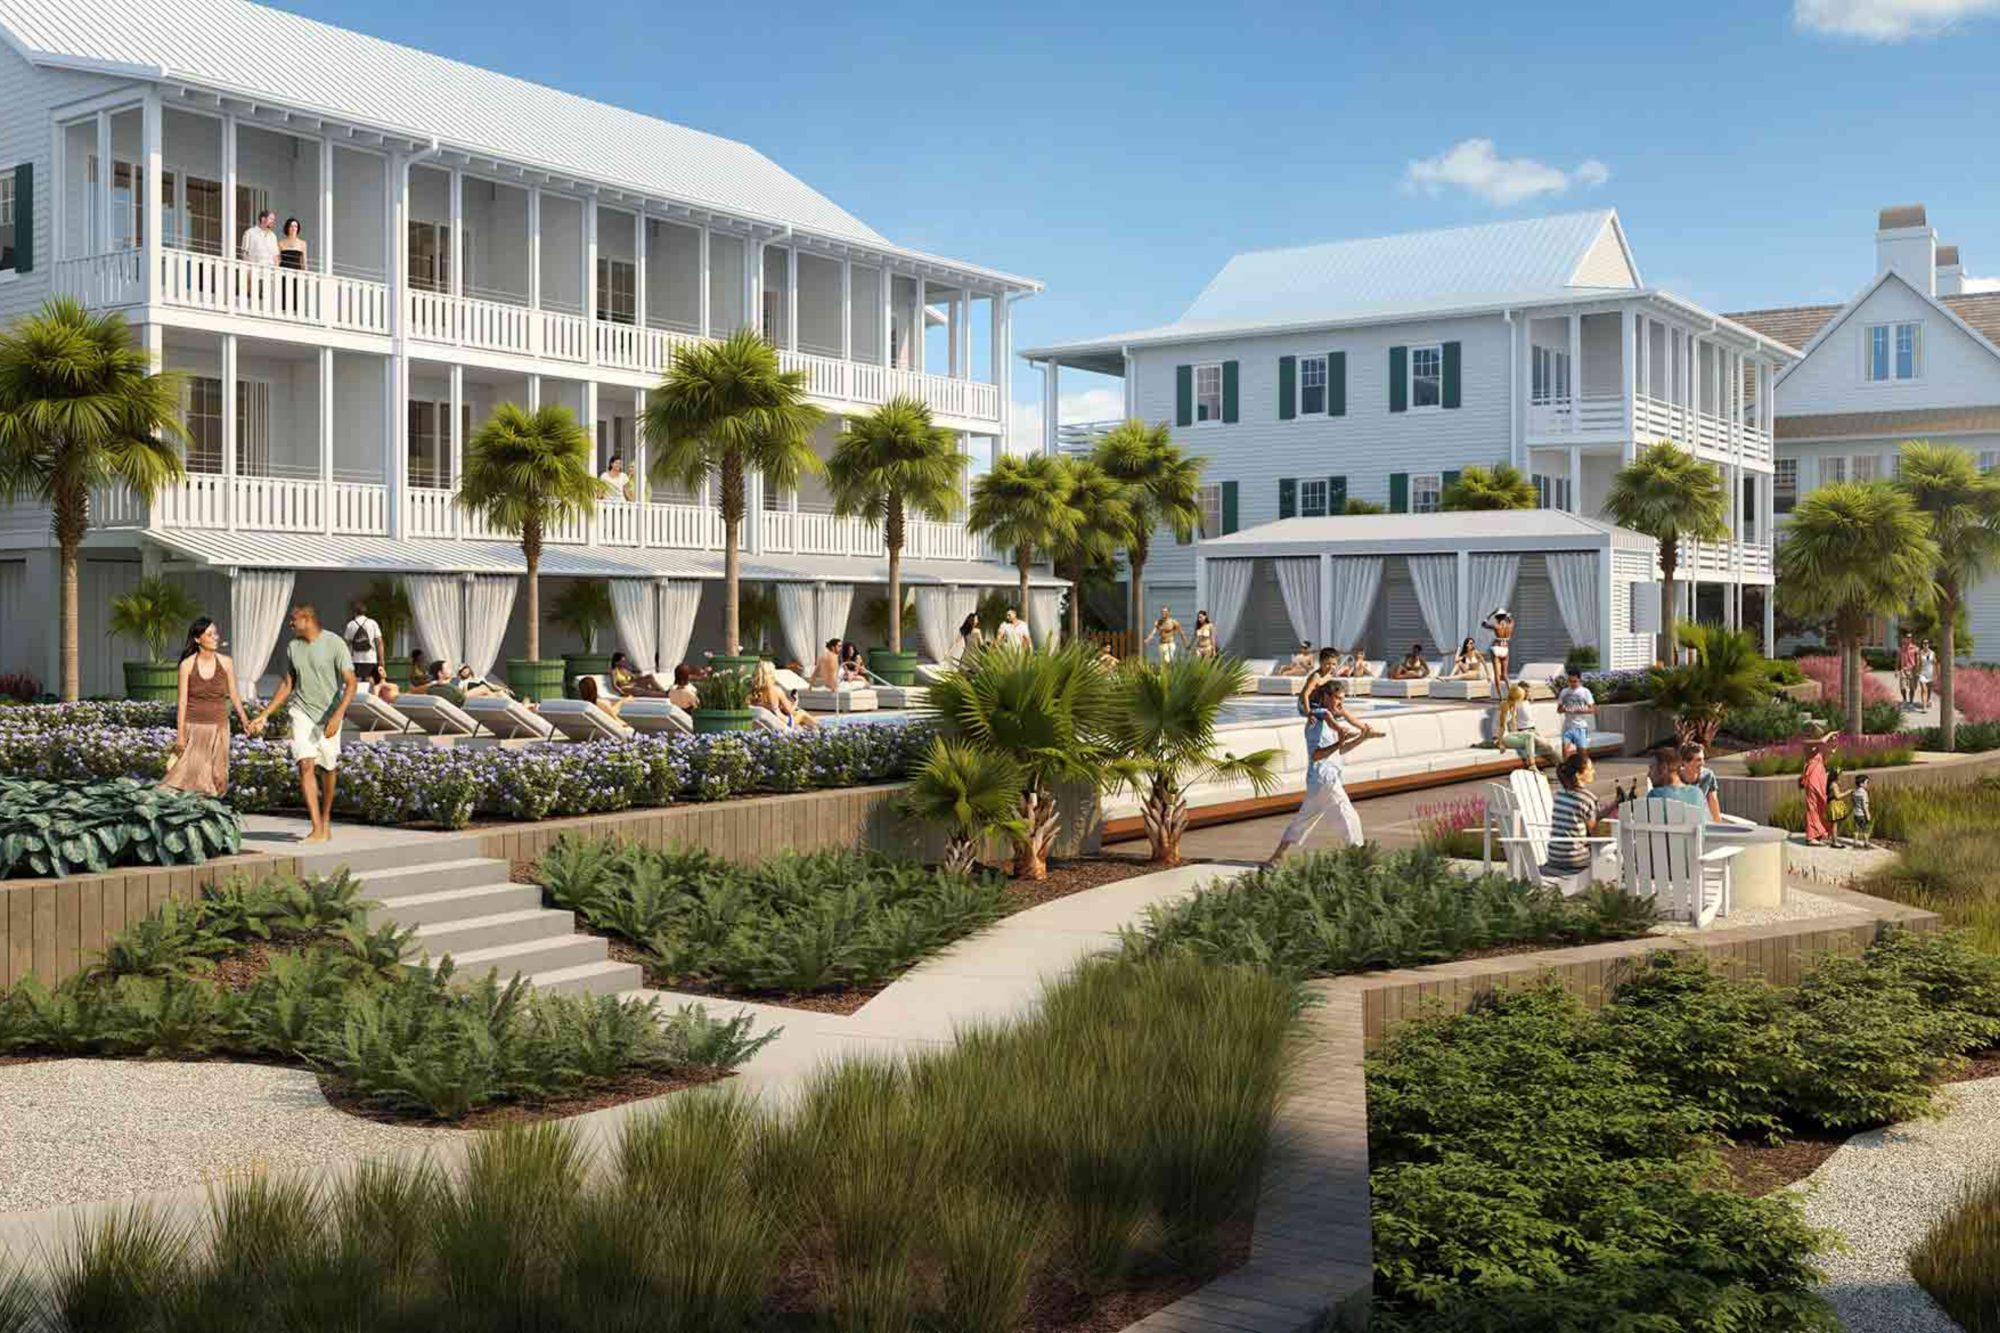 The Dunlin: A new Luxury Retreat set to debut in 2024 in Charleston, South Carolina